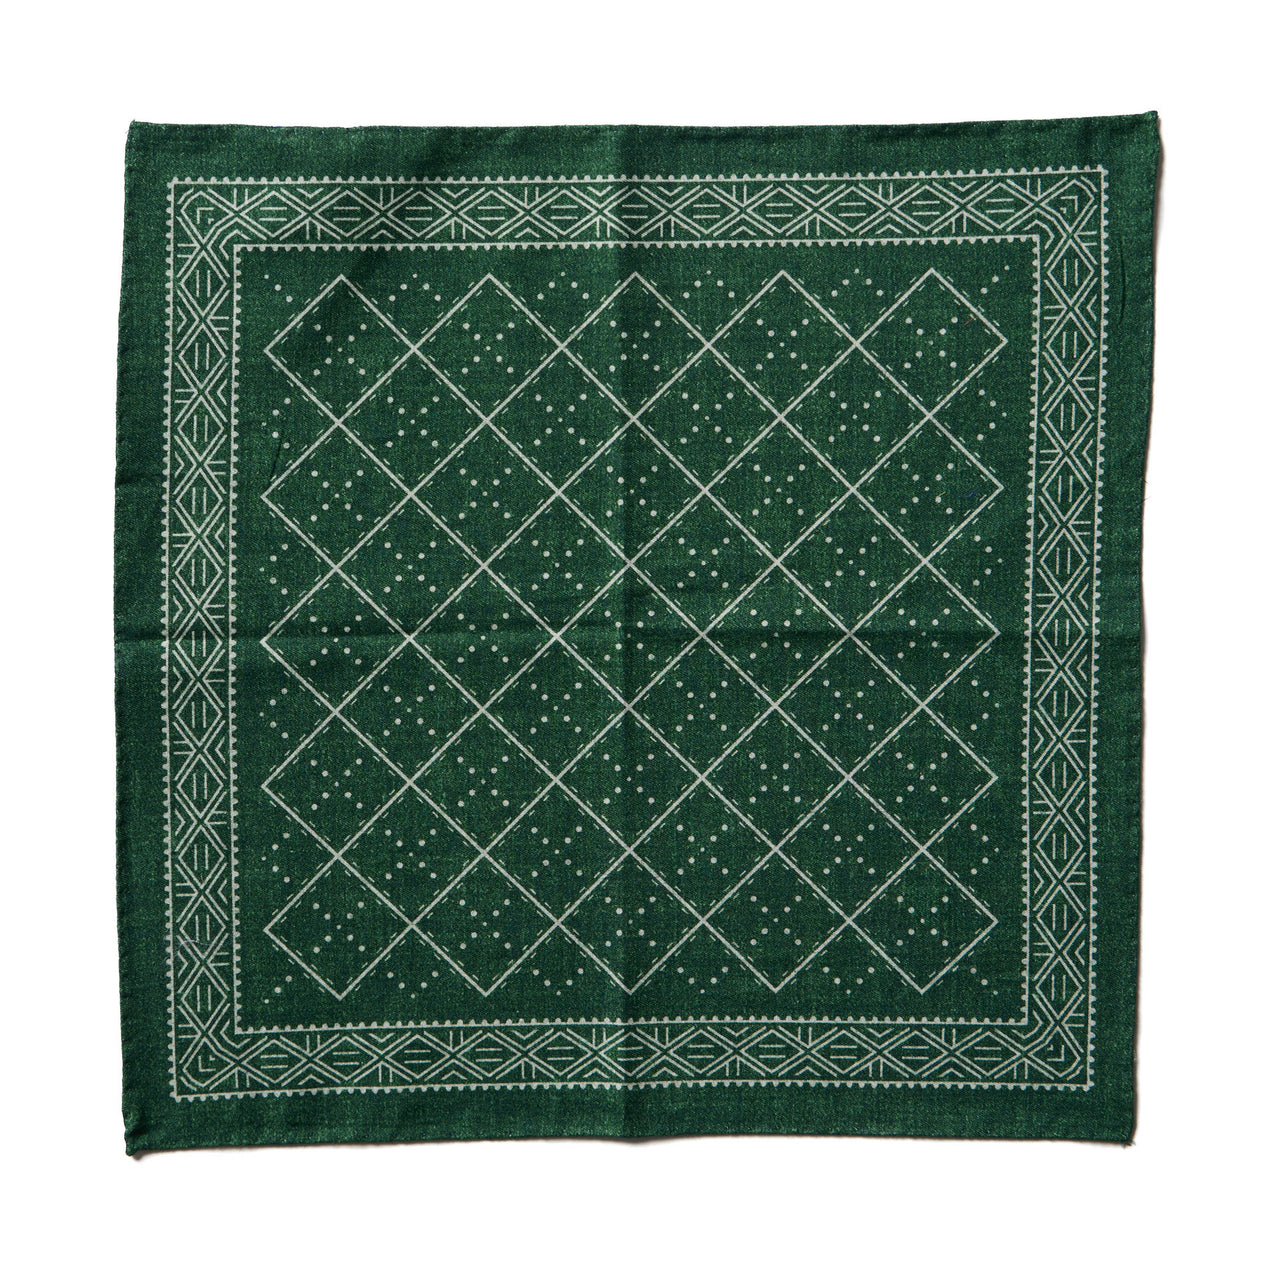 HENRY SARTORIAL X CANTINI Cotton Pocket Square GREEN